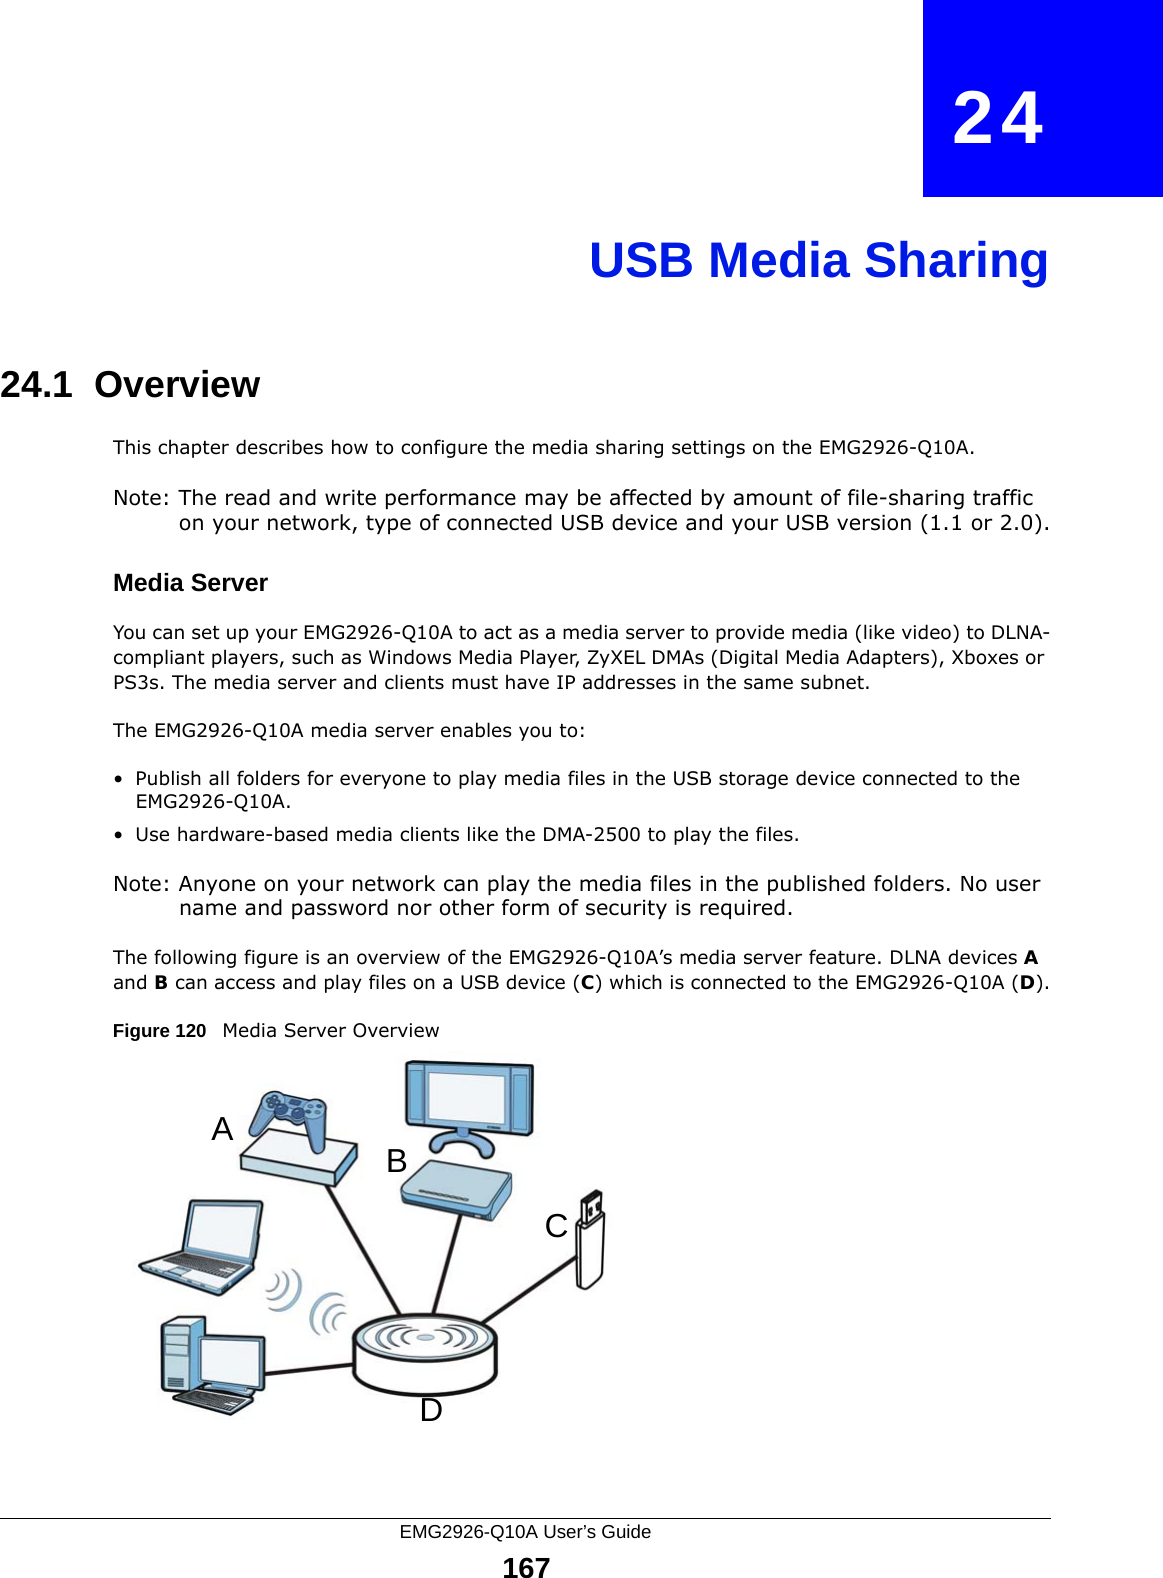 EMG2926-Q10A User’s Guide167CHAPTER   24USB Media Sharing24.1  OverviewThis chapter describes how to configure the media sharing settings on the EMG2926-Q10A.Note: The read and write performance may be affected by amount of file-sharing traffic on your network, type of connected USB device and your USB version (1.1 or 2.0).Media ServerYou can set up your EMG2926-Q10A to act as a media server to provide media (like video) to DLNA-compliant players, such as Windows Media Player, ZyXEL DMAs (Digital Media Adapters), Xboxes or PS3s. The media server and clients must have IP addresses in the same subnet.The EMG2926-Q10A media server enables you to:• Publish all folders for everyone to play media files in the USB storage device connected to the EMG2926-Q10A.• Use hardware-based media clients like the DMA-2500 to play the files.Note: Anyone on your network can play the media files in the published folders. No user name and password nor other form of security is required. The following figure is an overview of the EMG2926-Q10A’s media server feature. DLNA devices A and B can access and play files on a USB device (C) which is connected to the EMG2926-Q10A (D).Figure 120   Media Server OverviewABCD